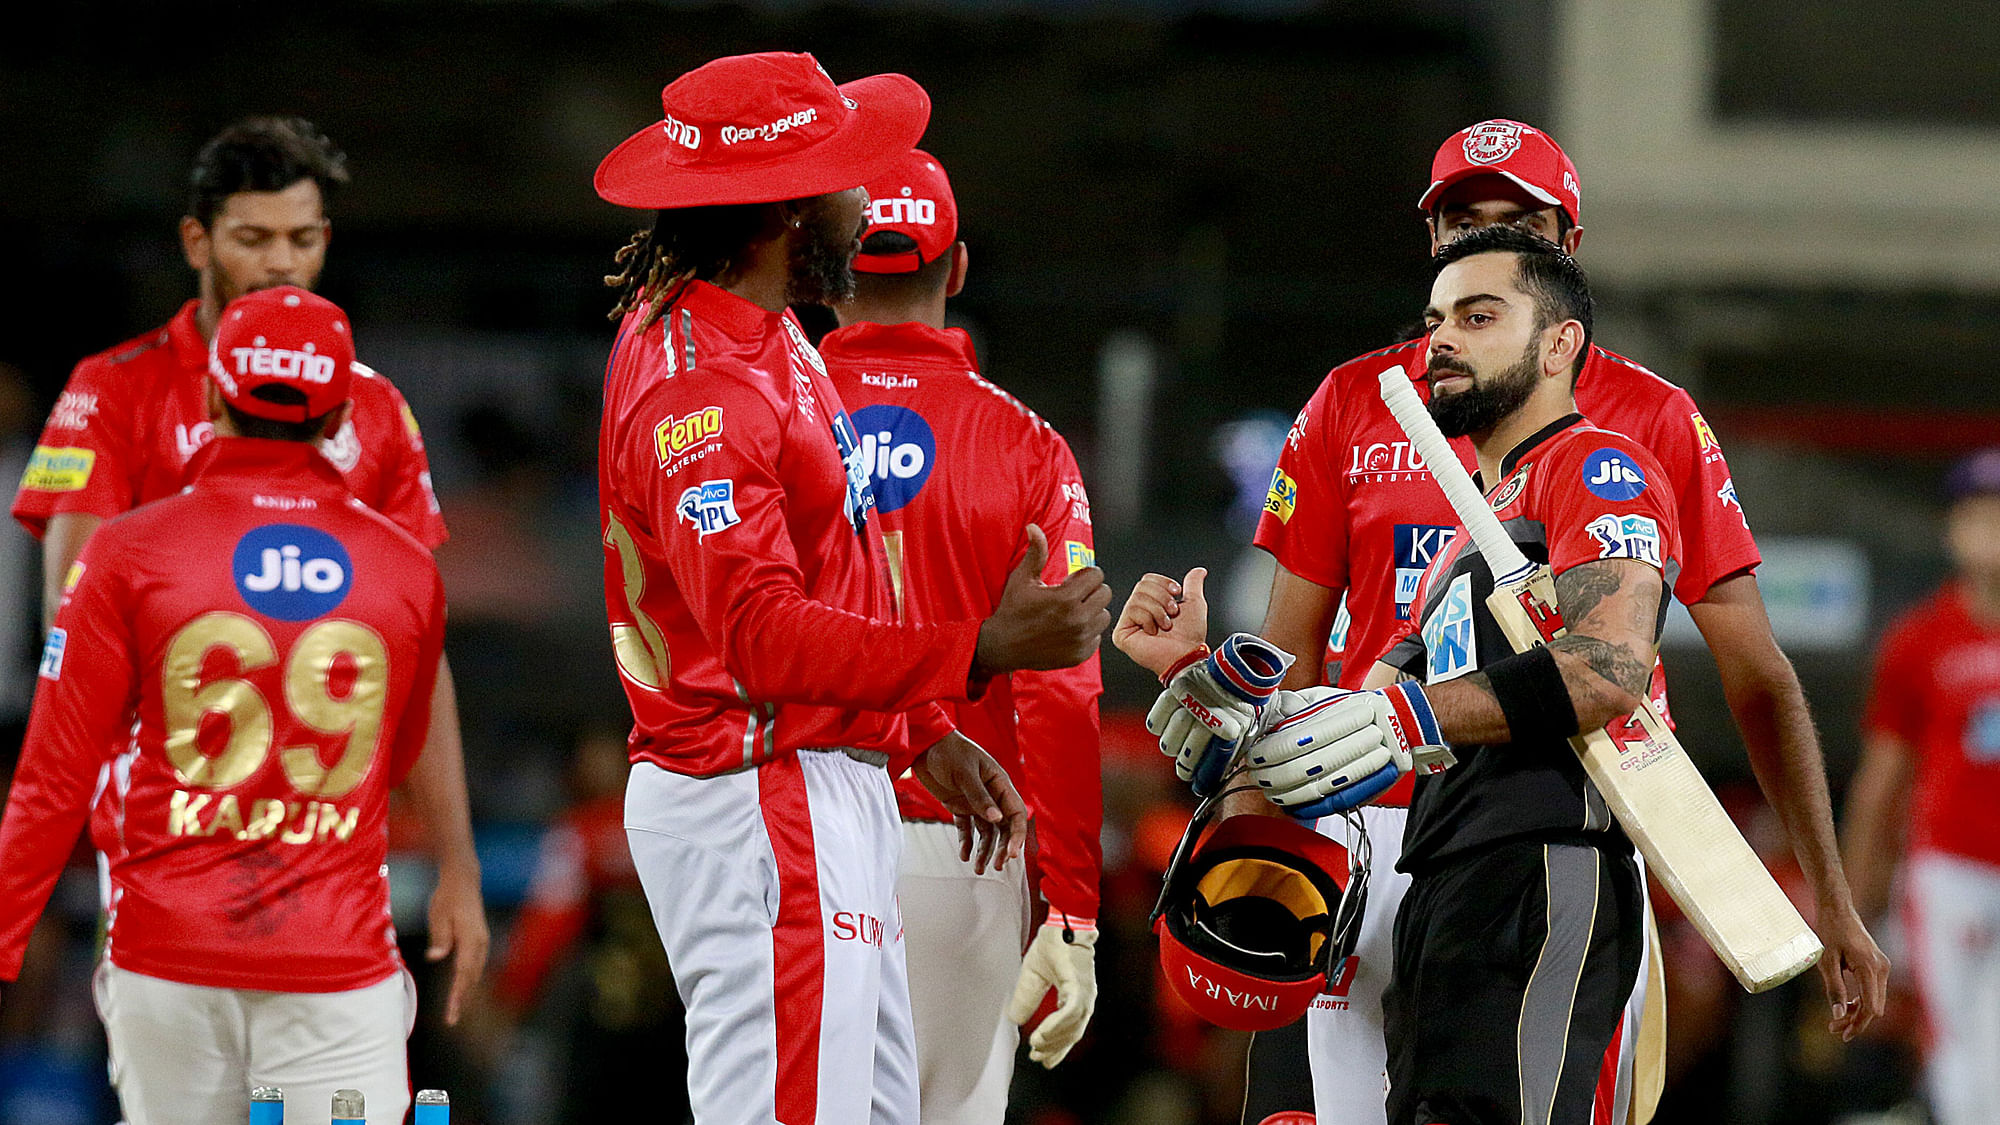 Virat Kohli shares a light moment with Chris Gayle after the match between Kings XI Punjab and Royal Challengers Bangalore.